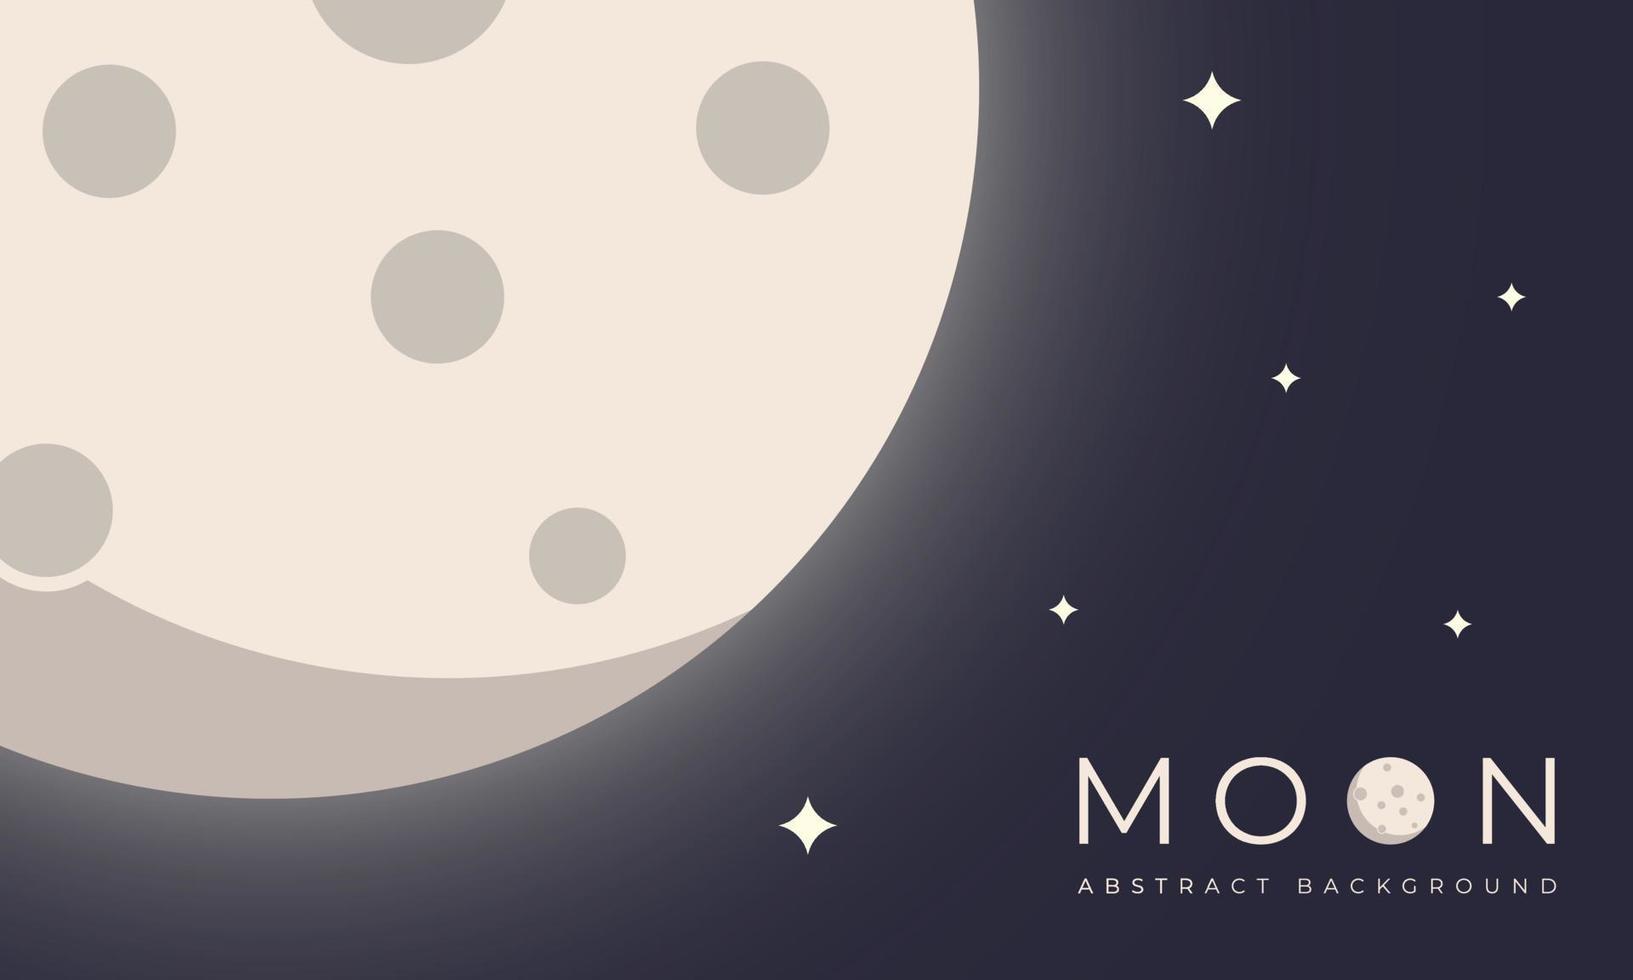 abstract moon background . moon vector illustration . flat and clean style . vector illustration eps10